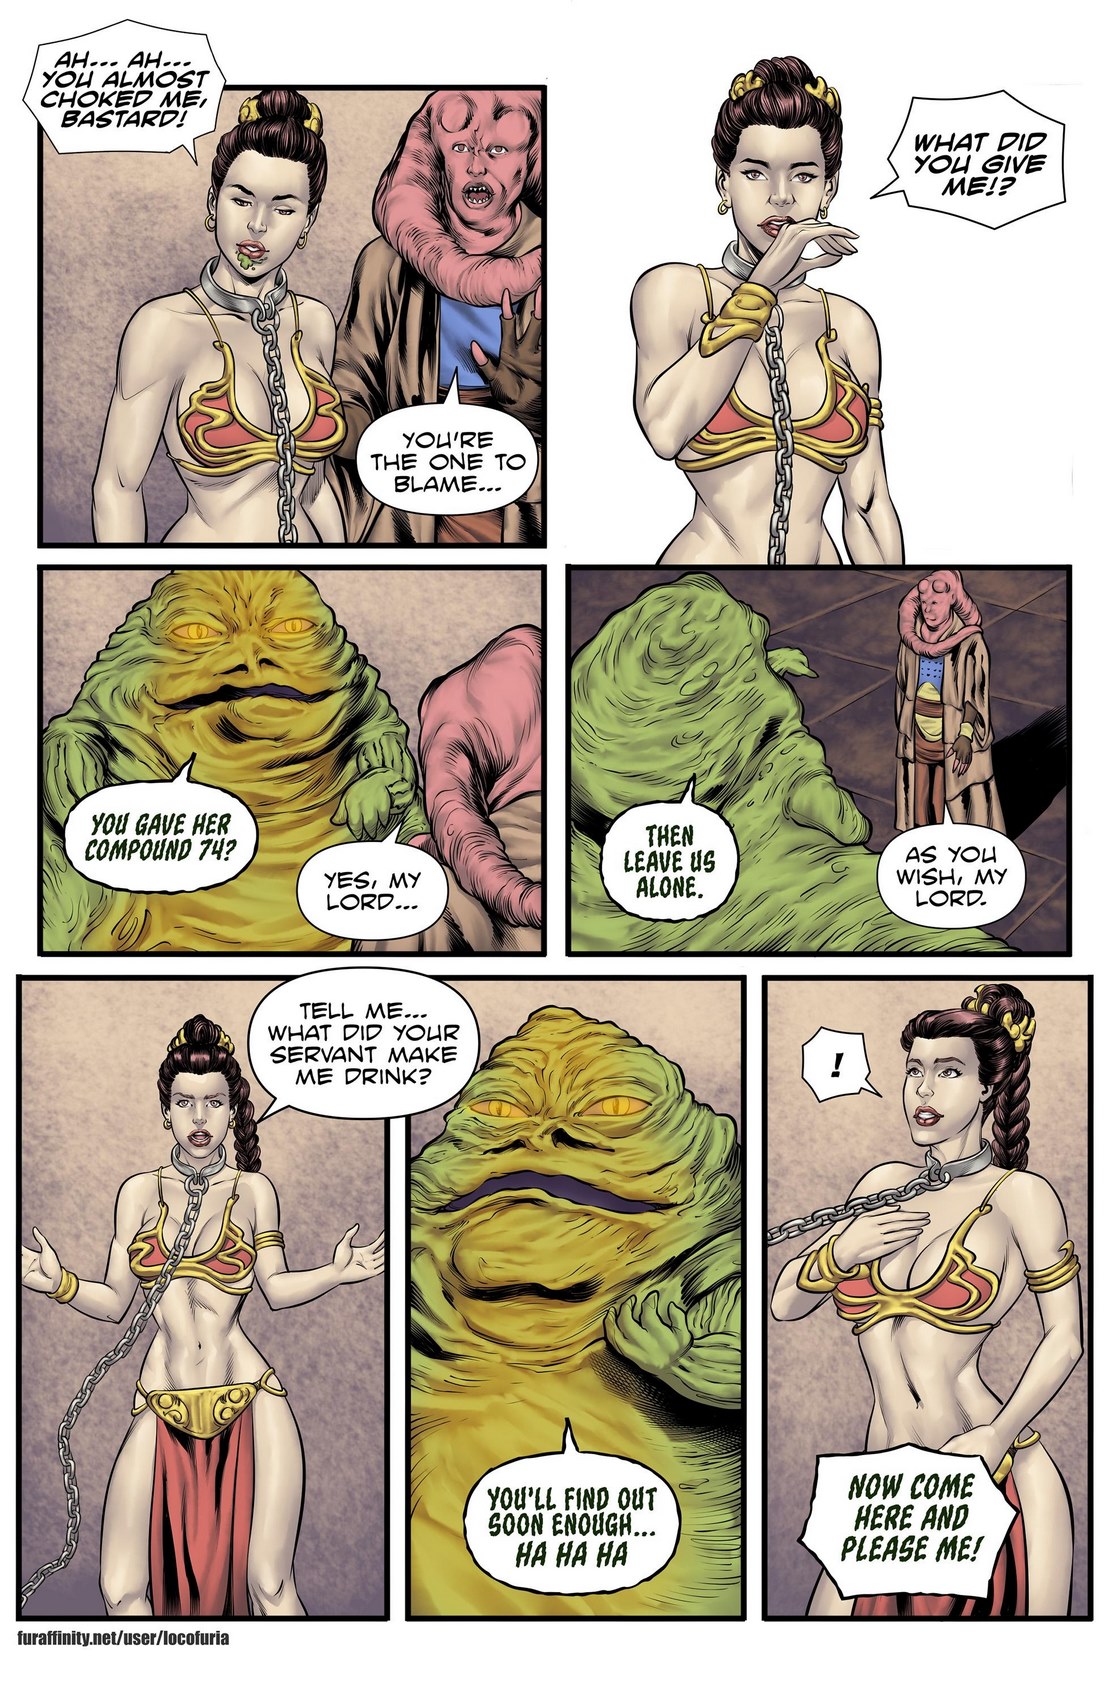 Discover the Dark Side with Slave Leia Porn Comics